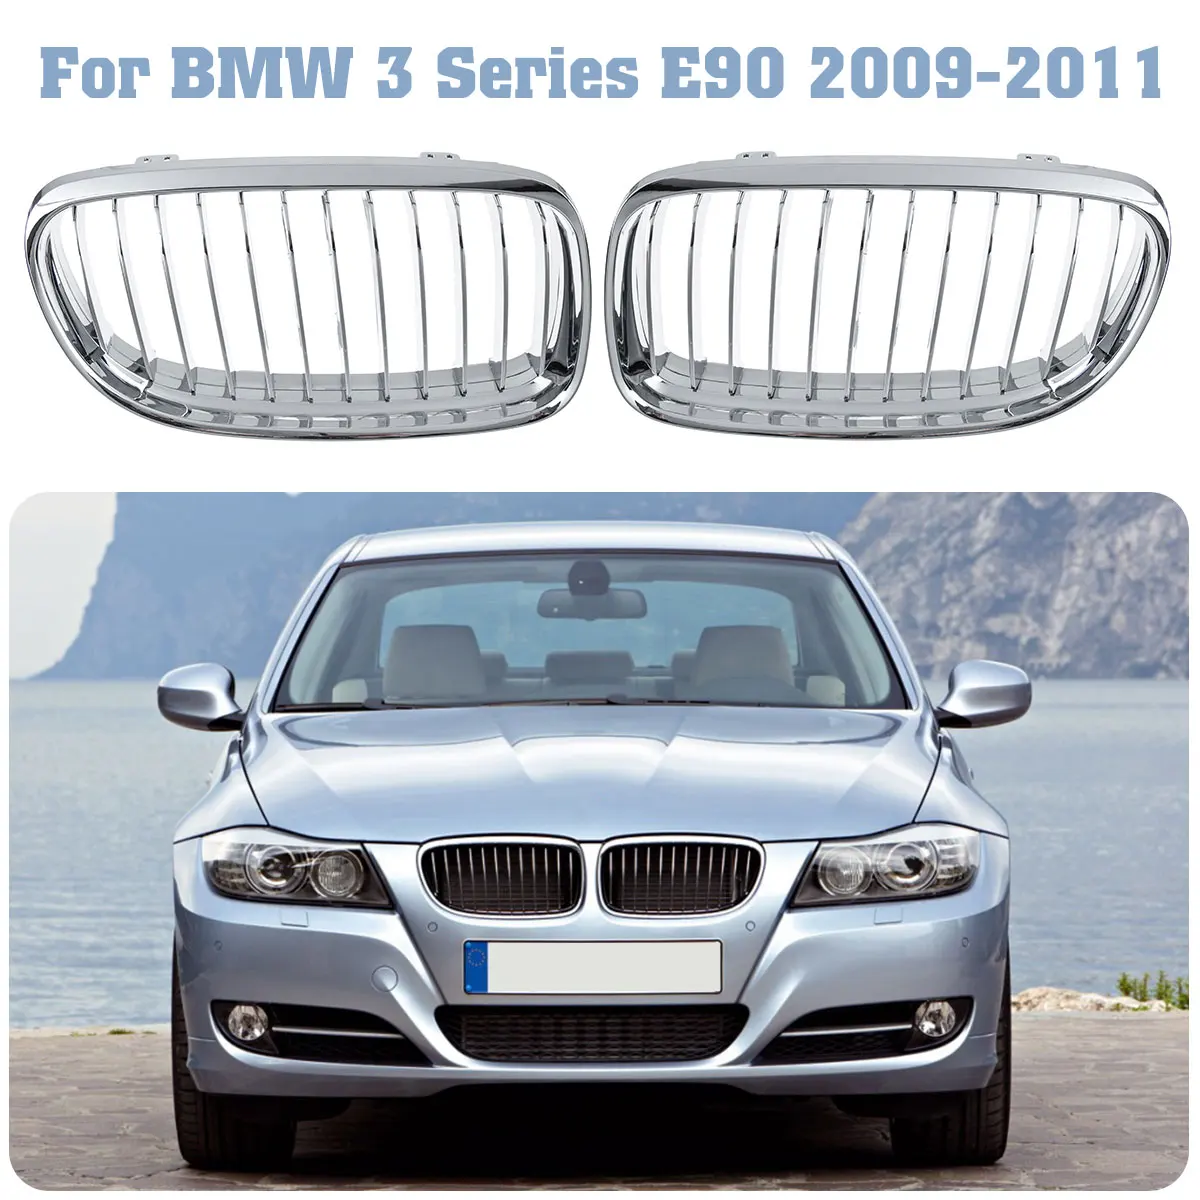 

1 Pair Car Bumper Front Kidney Grill Grill Glossy Chrome For BMW 3 Series E90 2009 2010 2011 For LCI 323i 325i 330i 335i